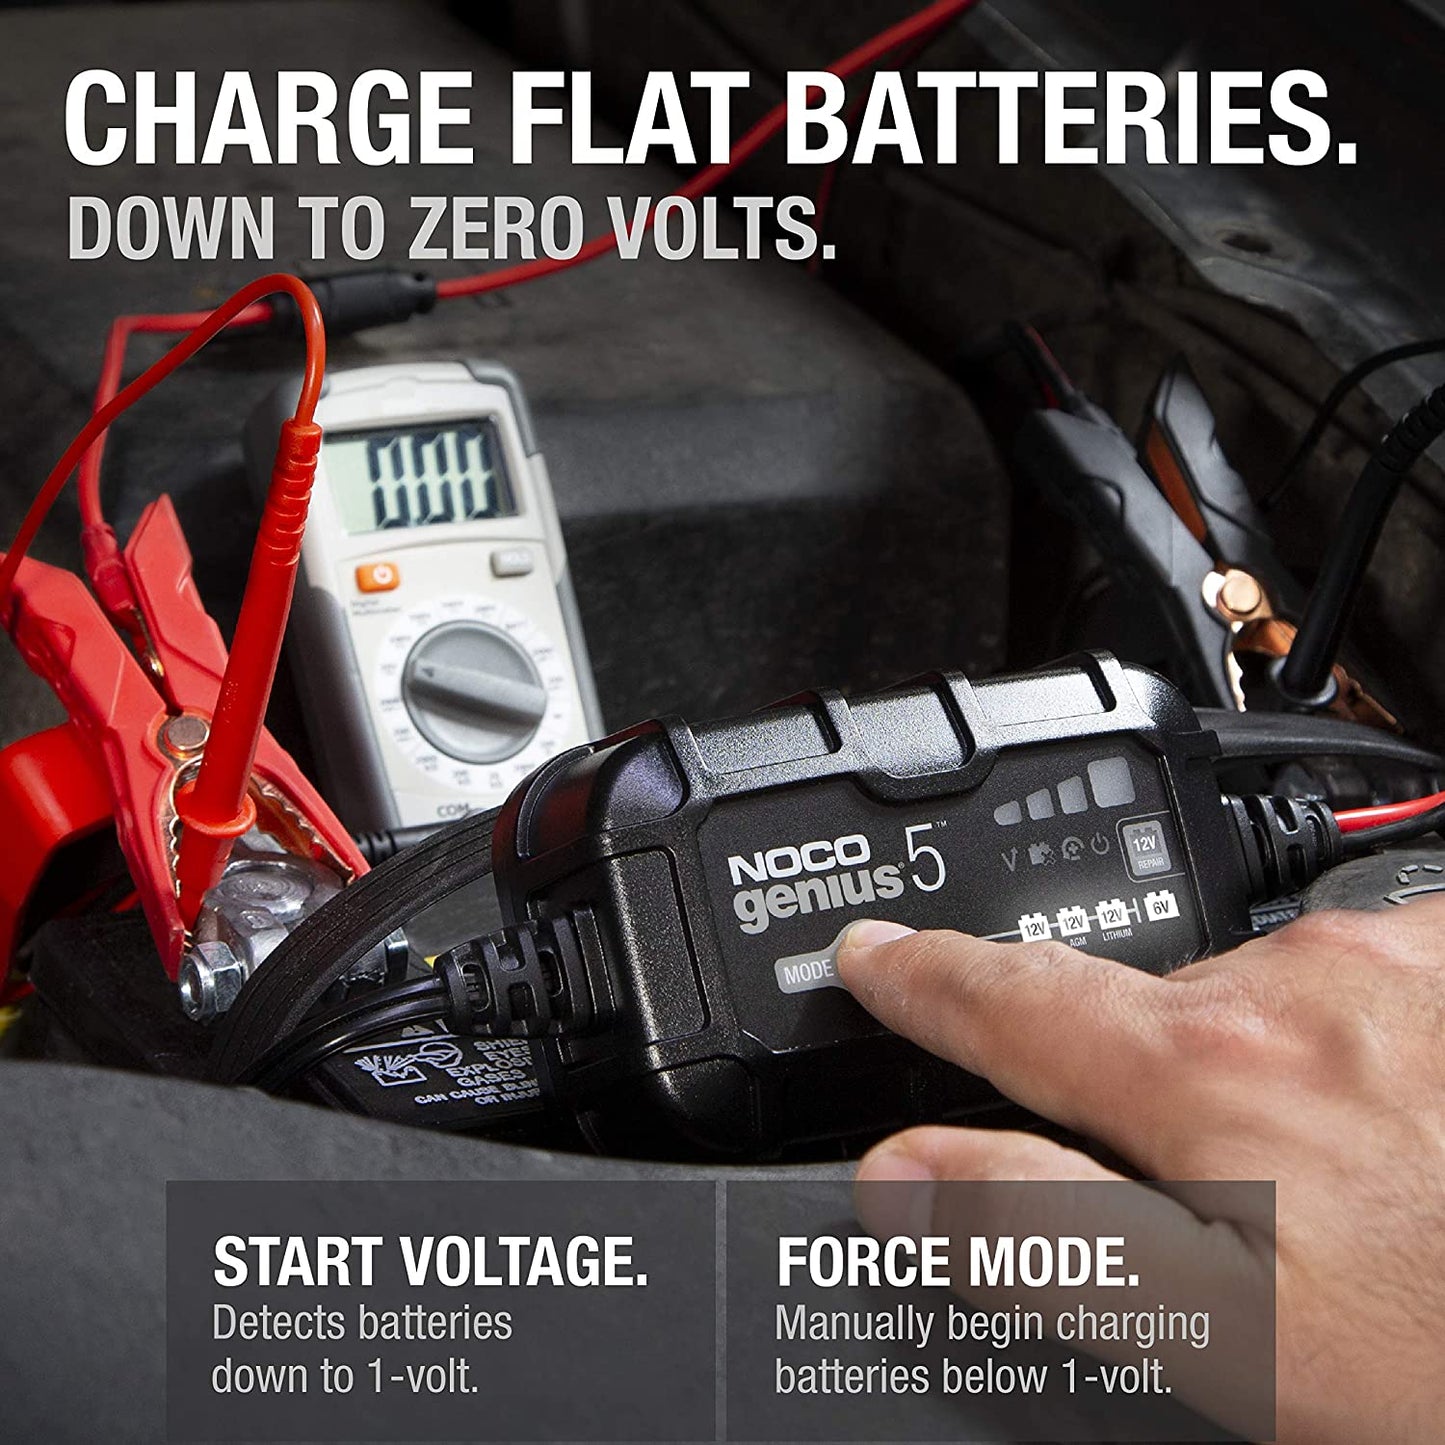 Noco Genius5 5 Amp Battery Charger, Maintainer, and Desulfator